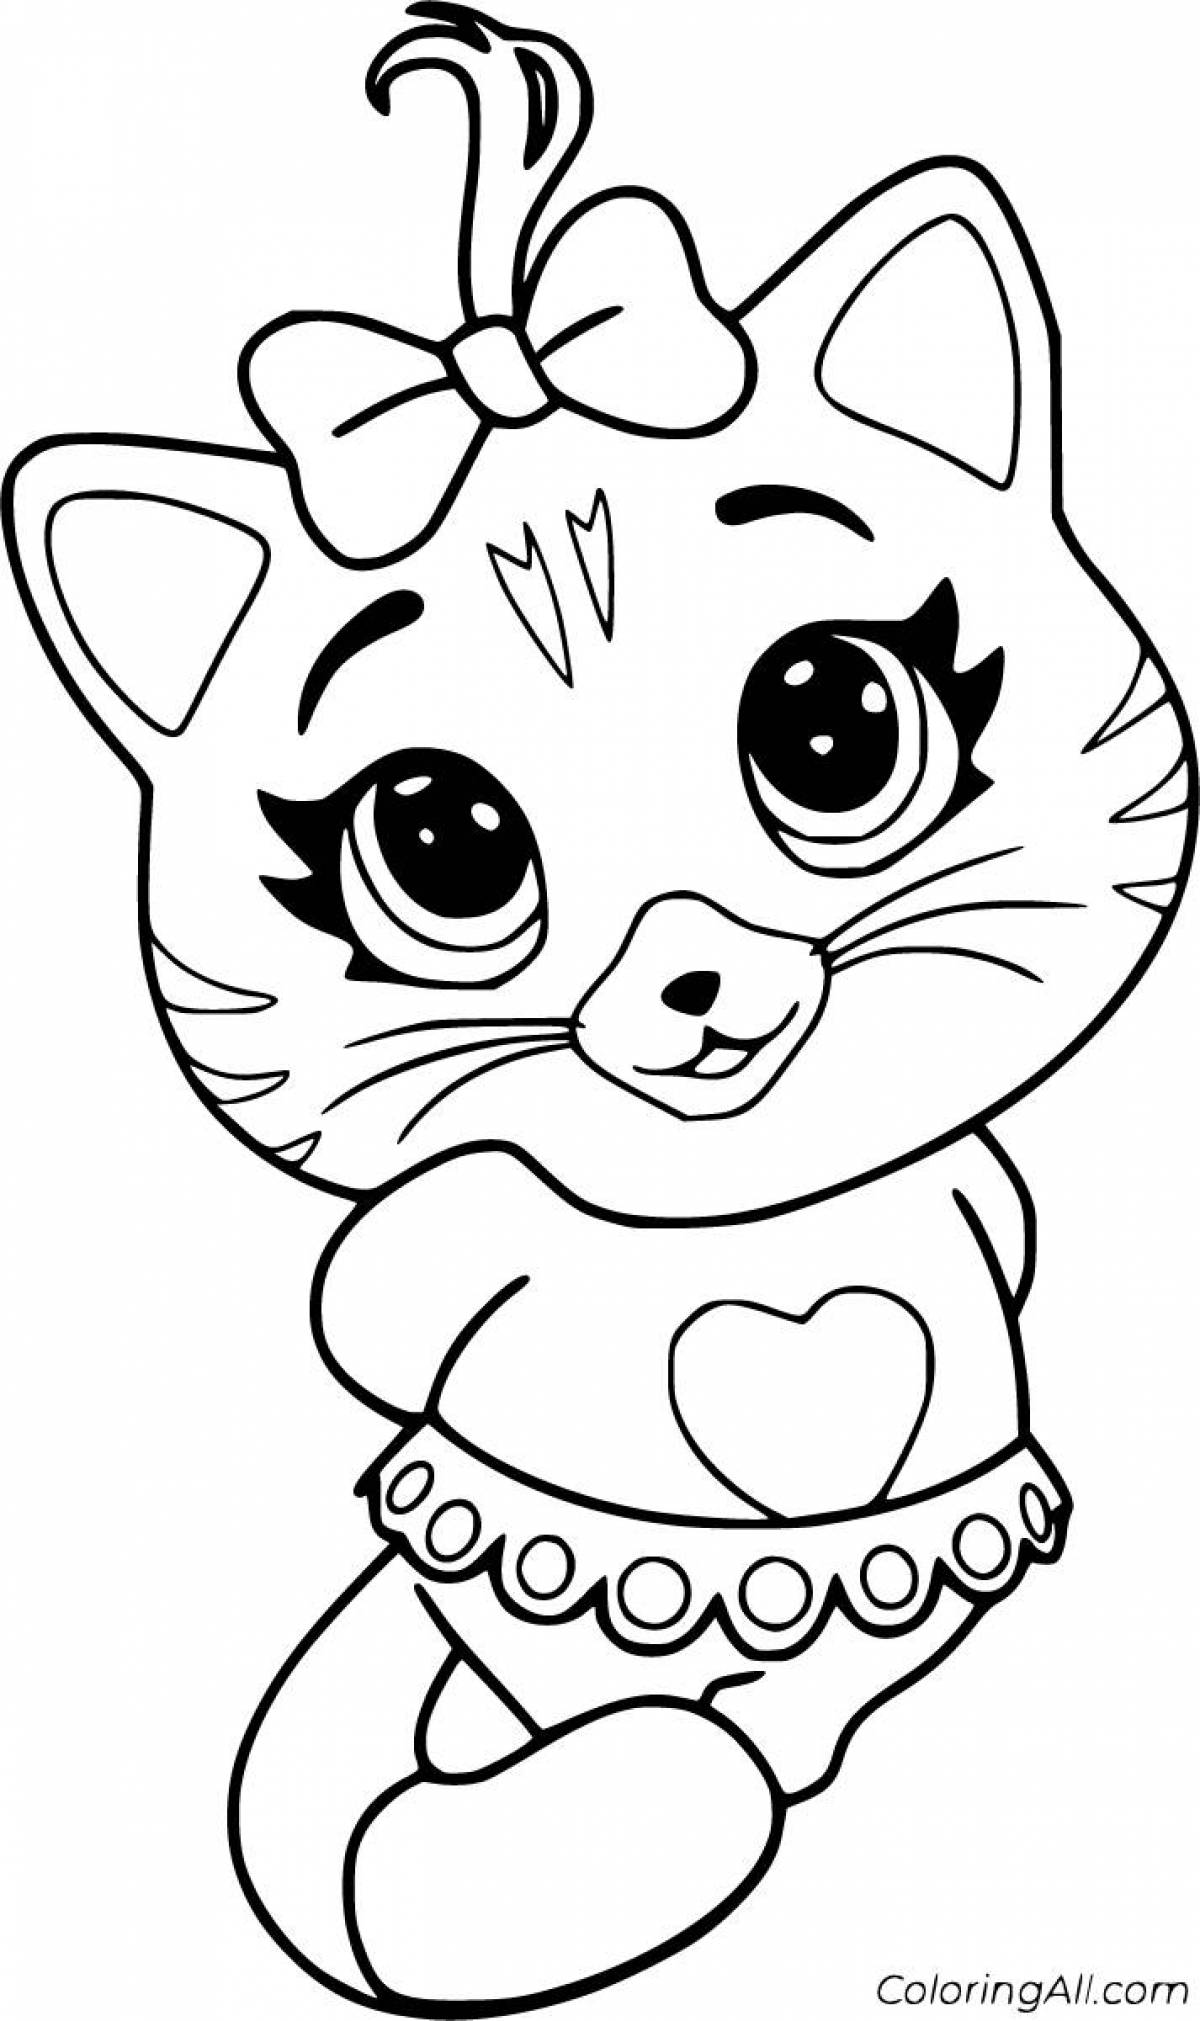 Curious kittens coloring page